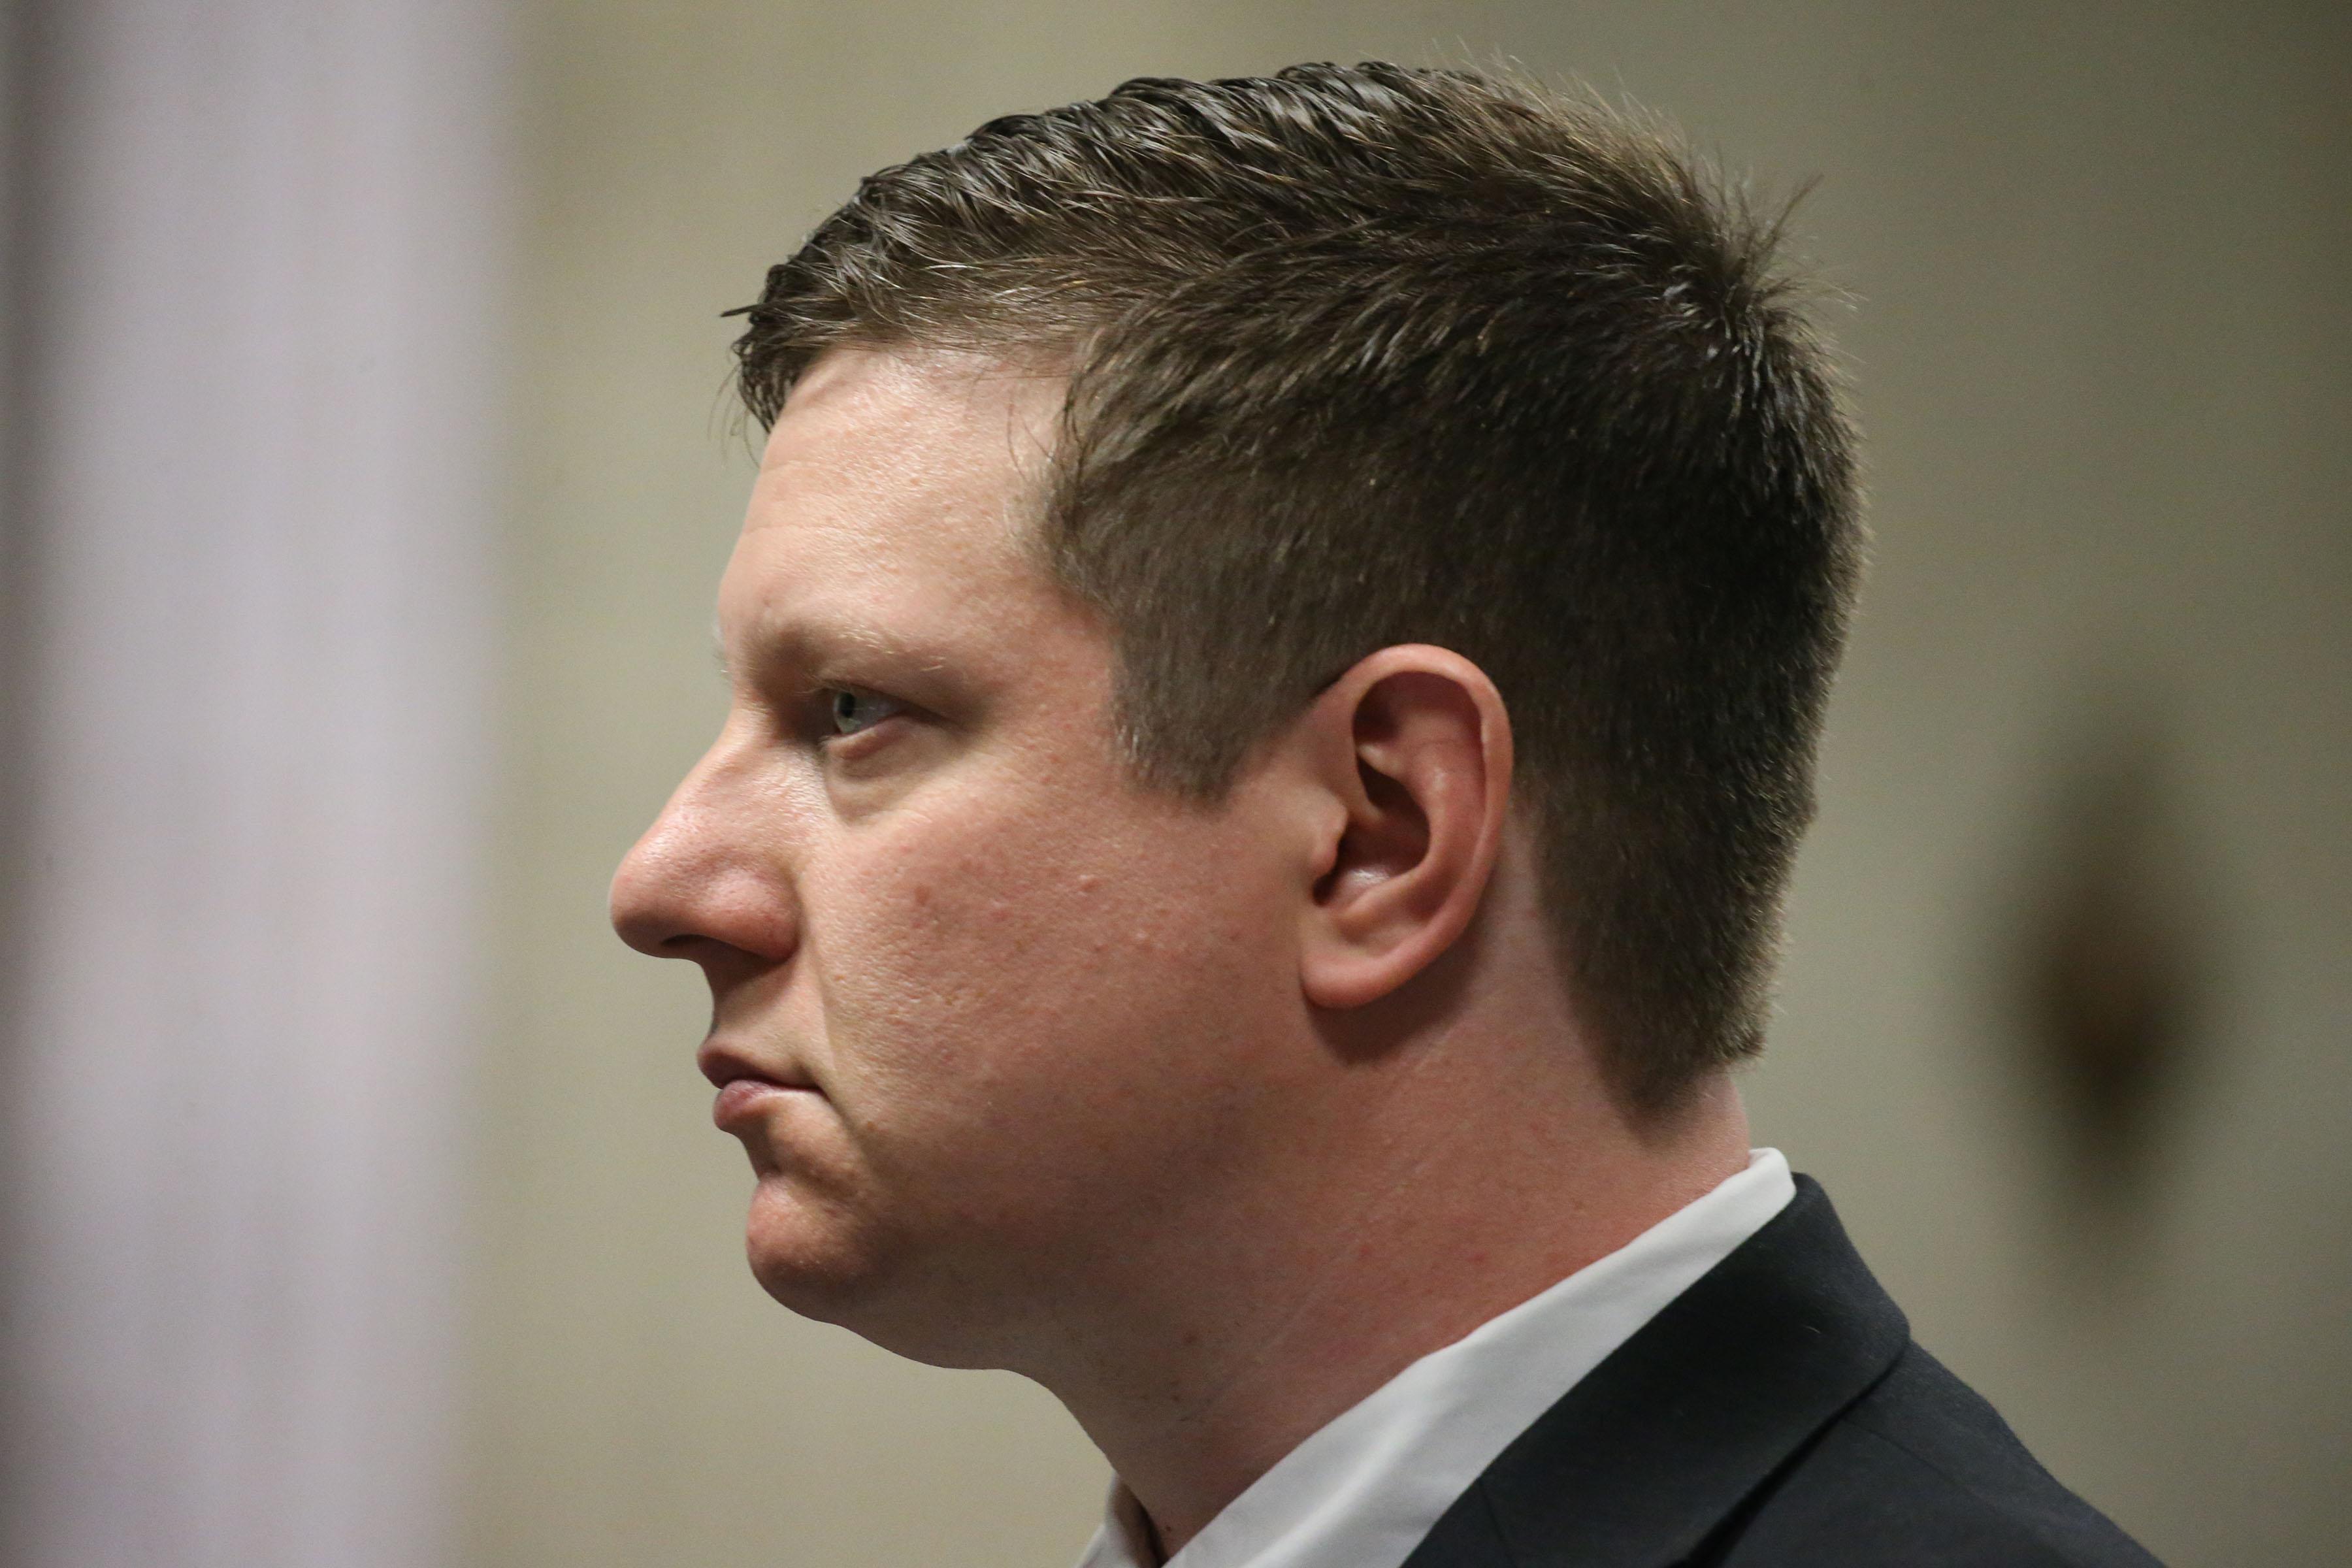 Chicago police Officer Jason Van Dyke attends a hearing for the shooting death of Laquan McDonald at the Leighton Criminal Court Building, Friday, May 4, 2018.  The media was later ordered to leave the courtroom. (Antonio Perez / Chicago Tribune / Pool)